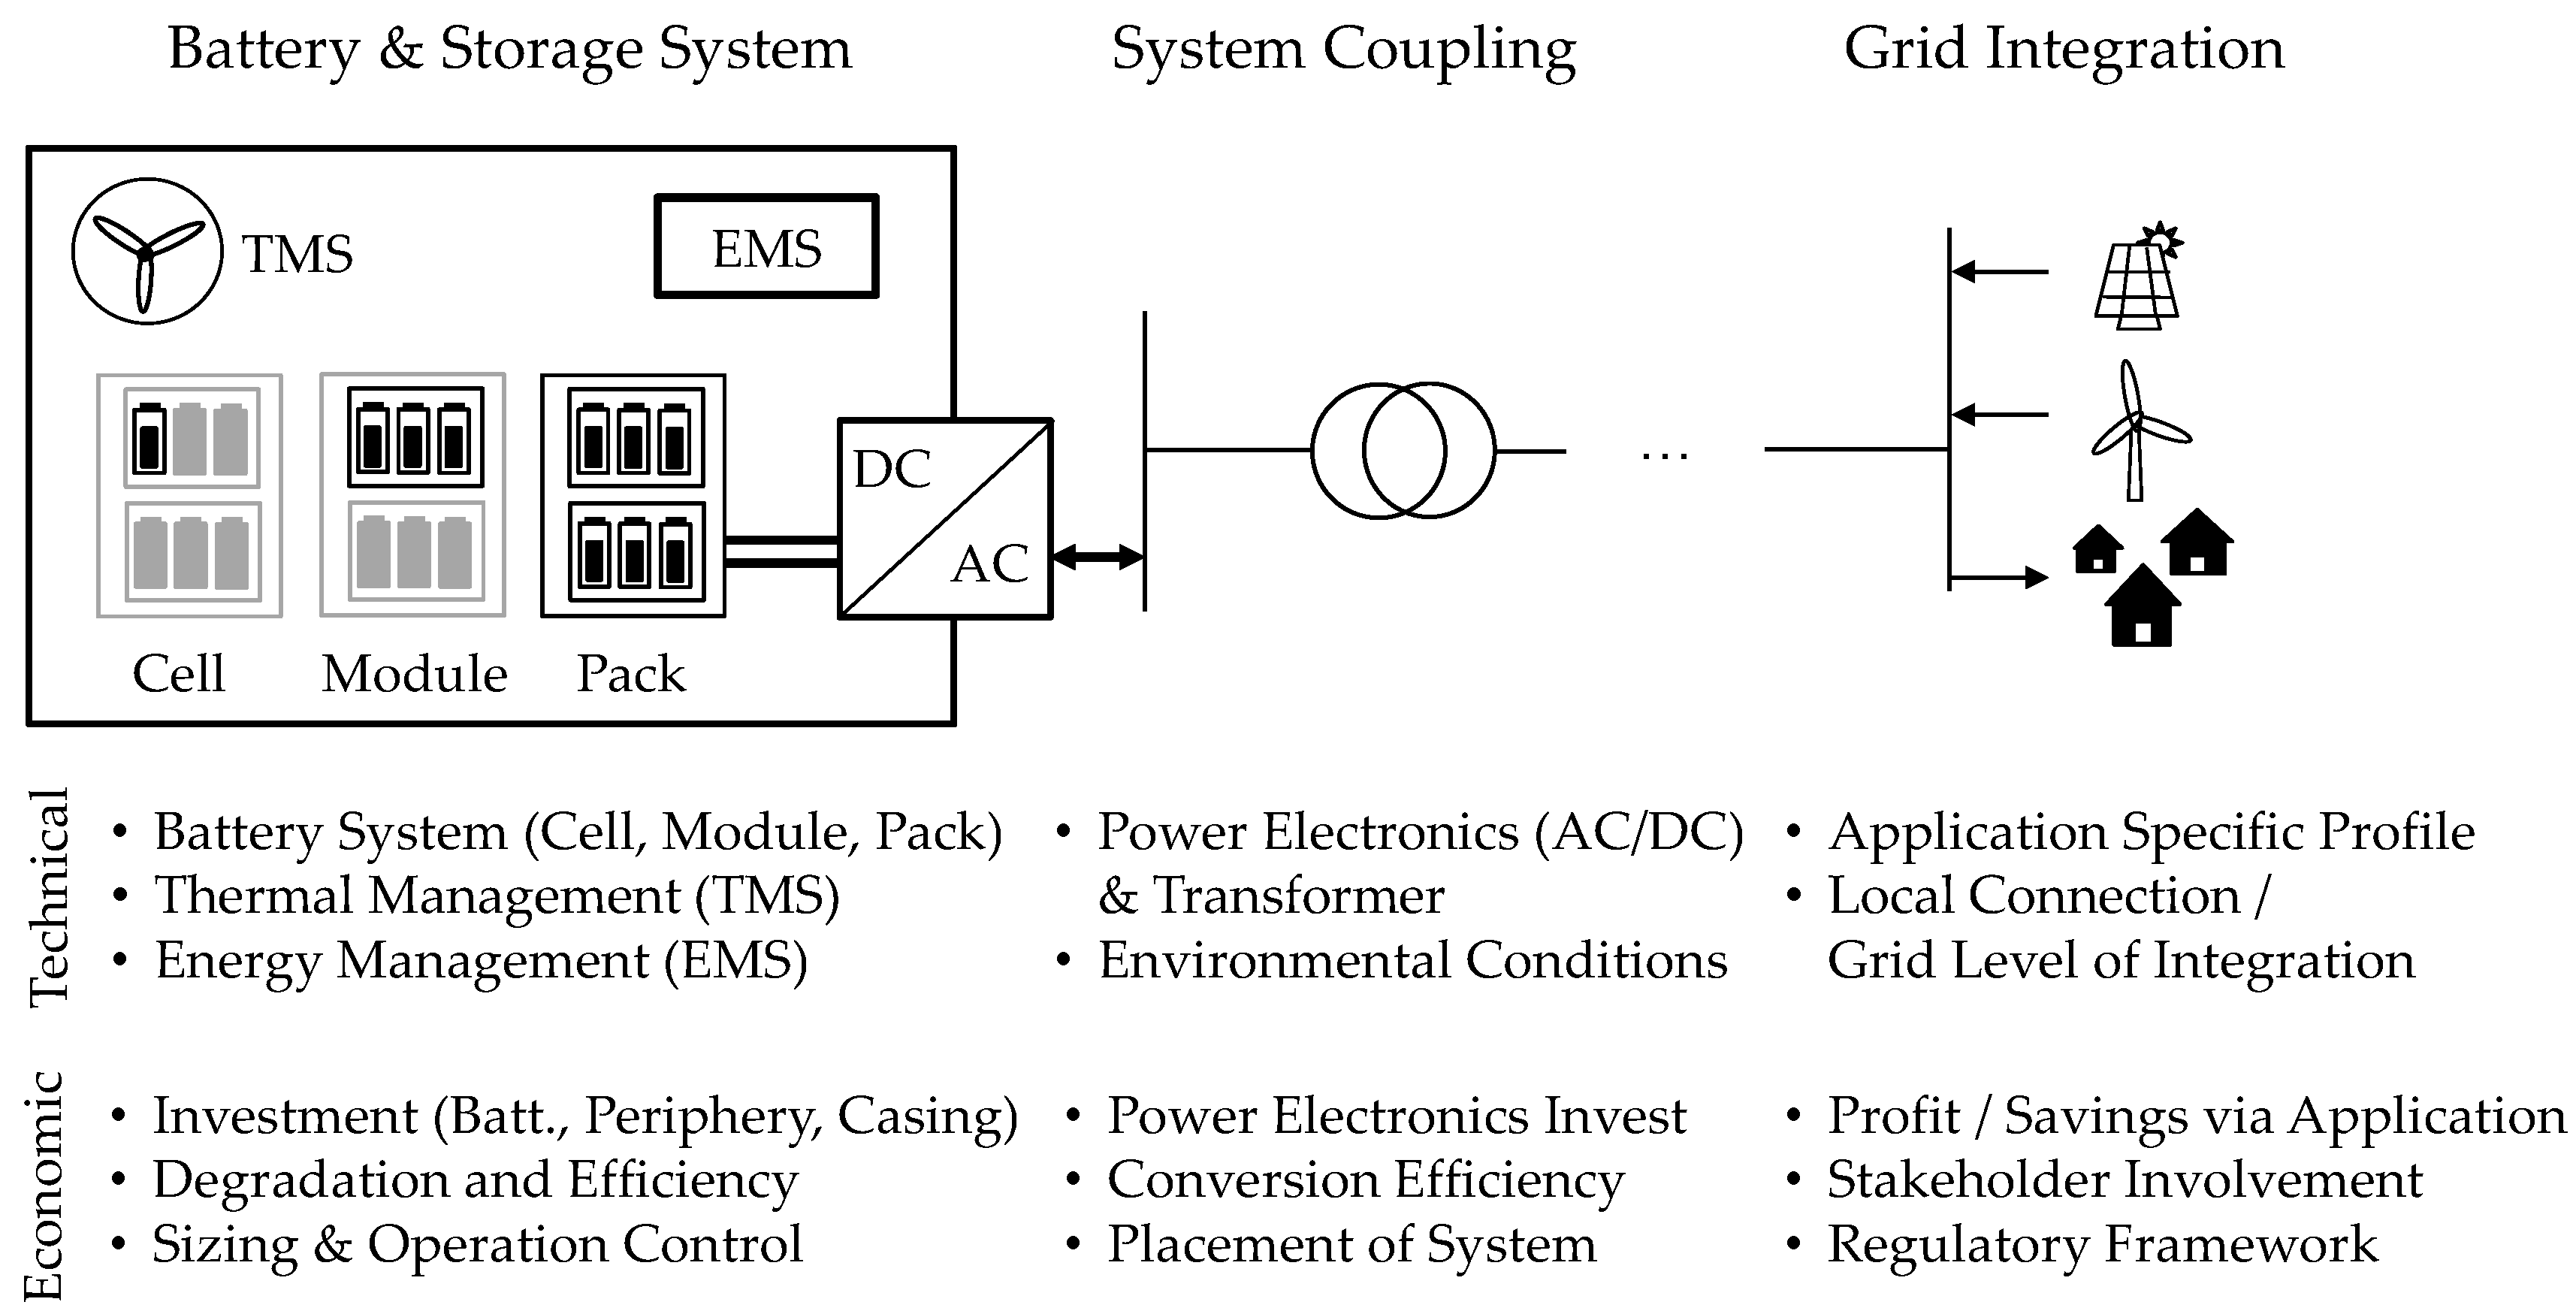 Energies | Free Full-Text | Lithium-Ion Battery Storage ... pv line diagram 